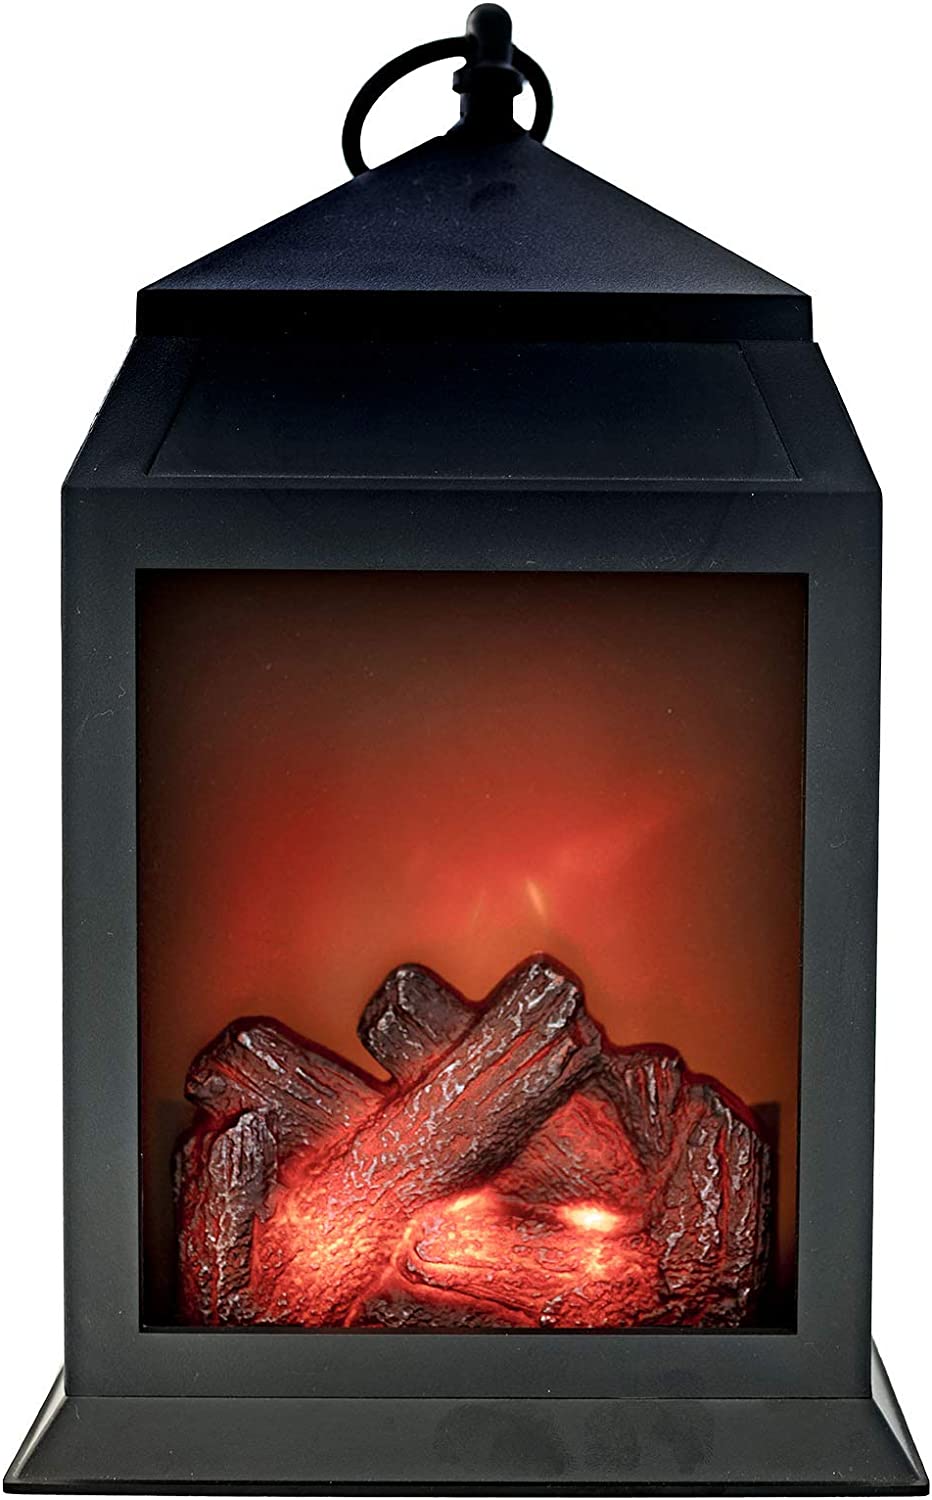 LitezAll Large Cozy Fireplace Lantern – Integrated Carry and Hanging Handle – Portable Battery-Operated Lantern – Survival kit for Hurricane, Power Outage, Emergency, Camping, Backpacking, Indoors